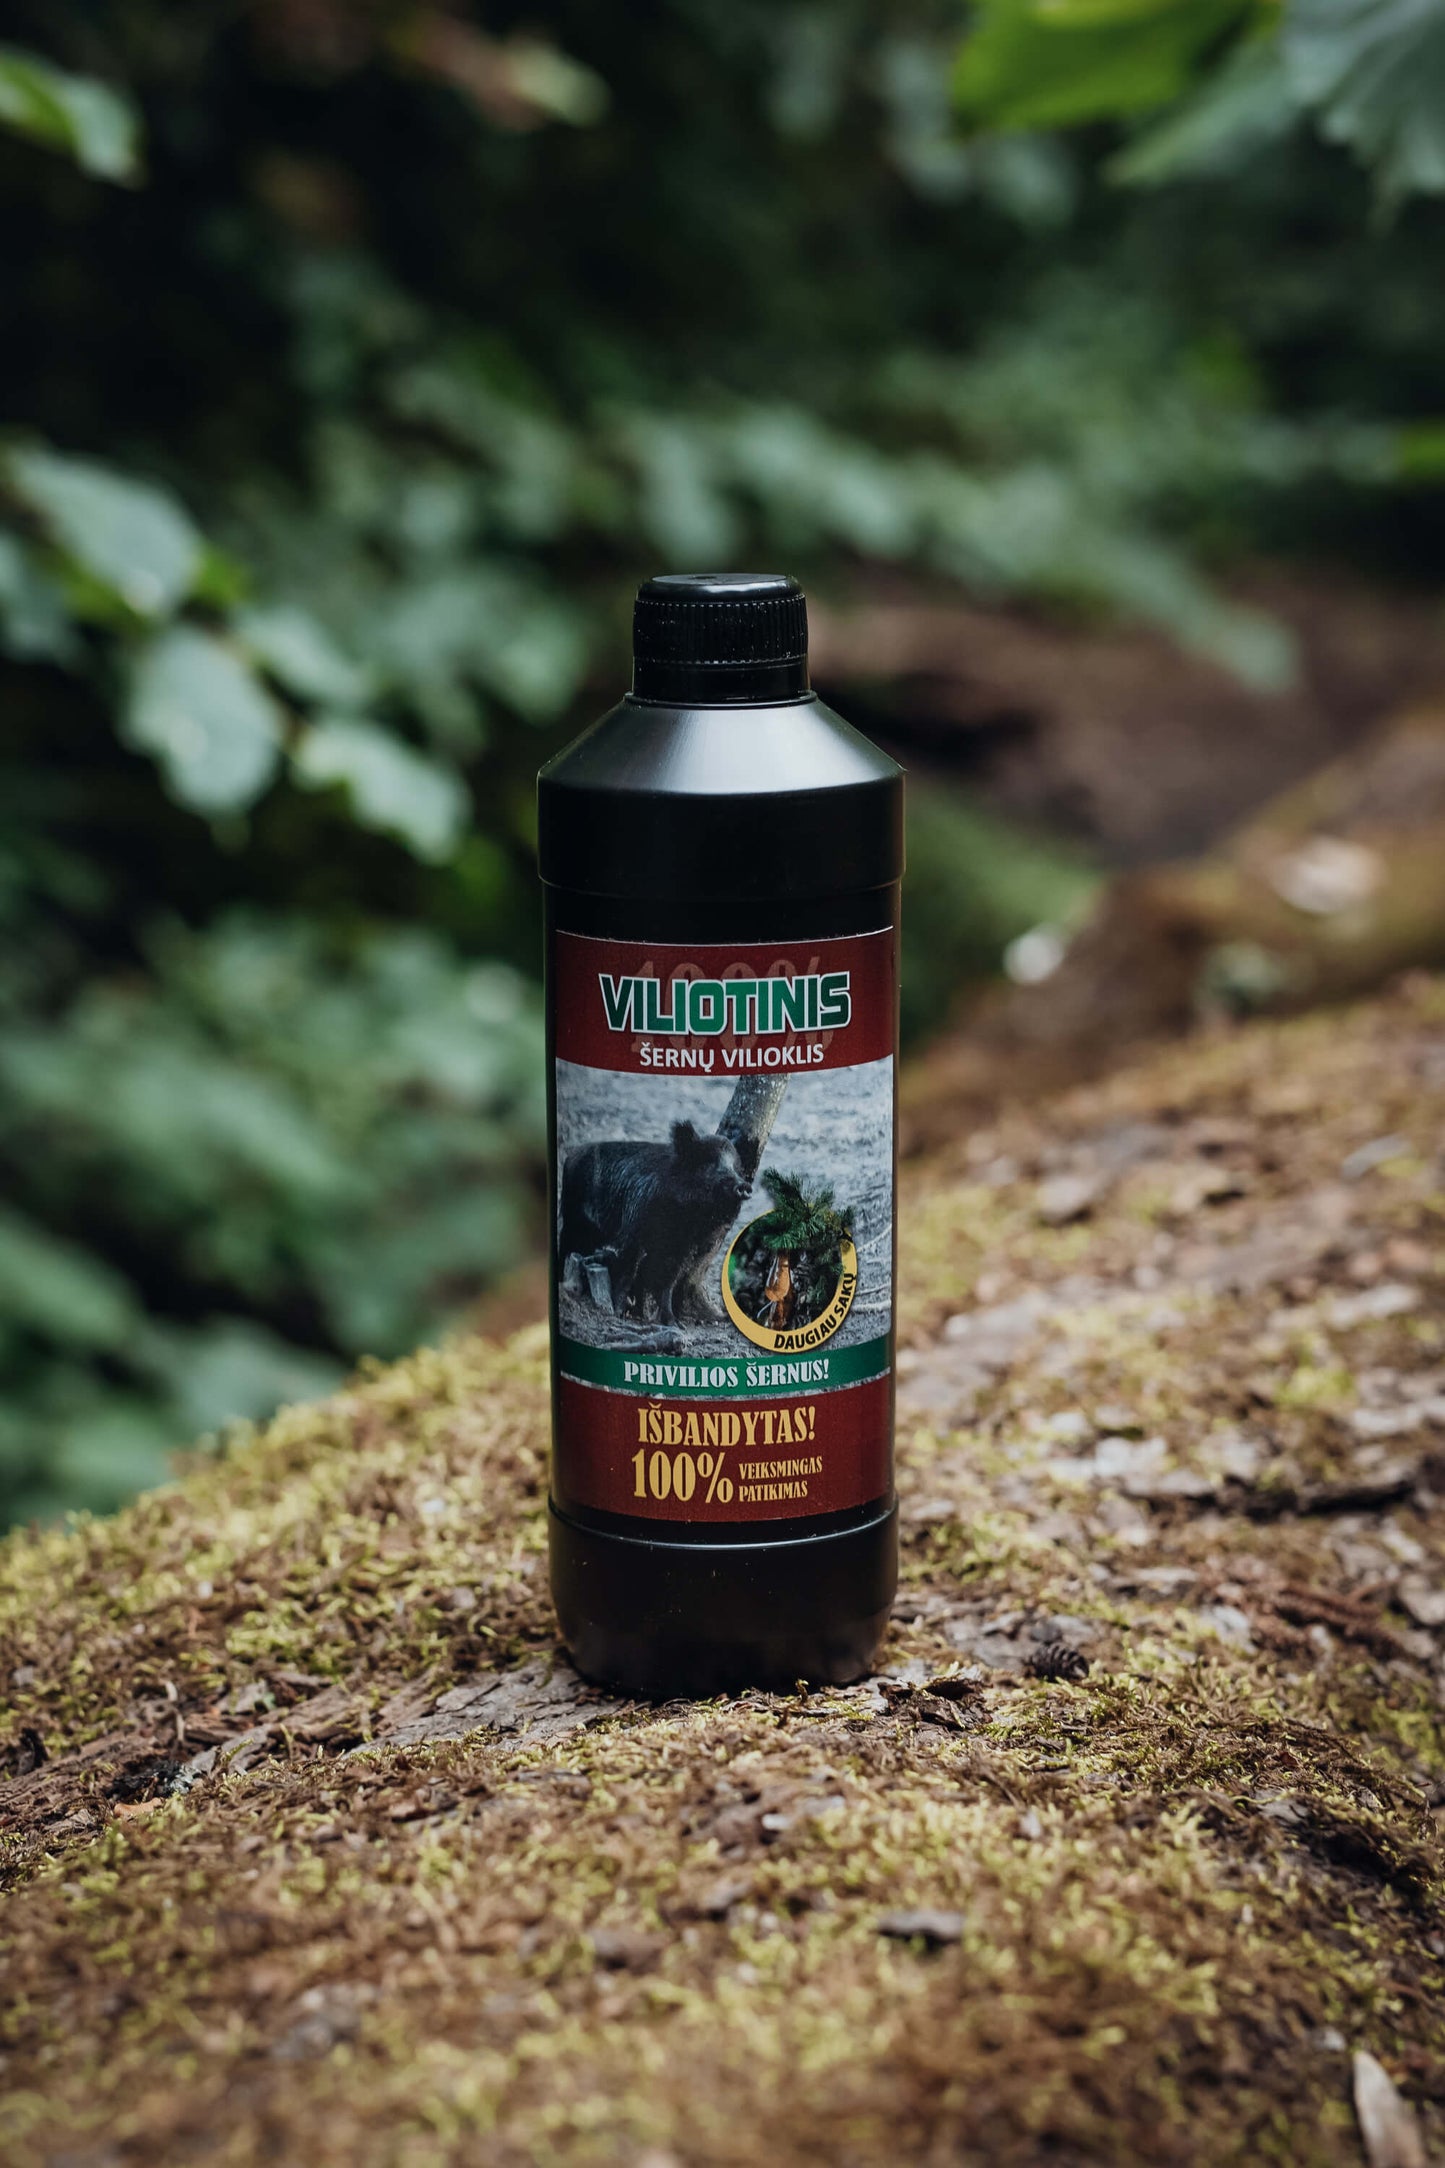 Hunting attractant for wildboars